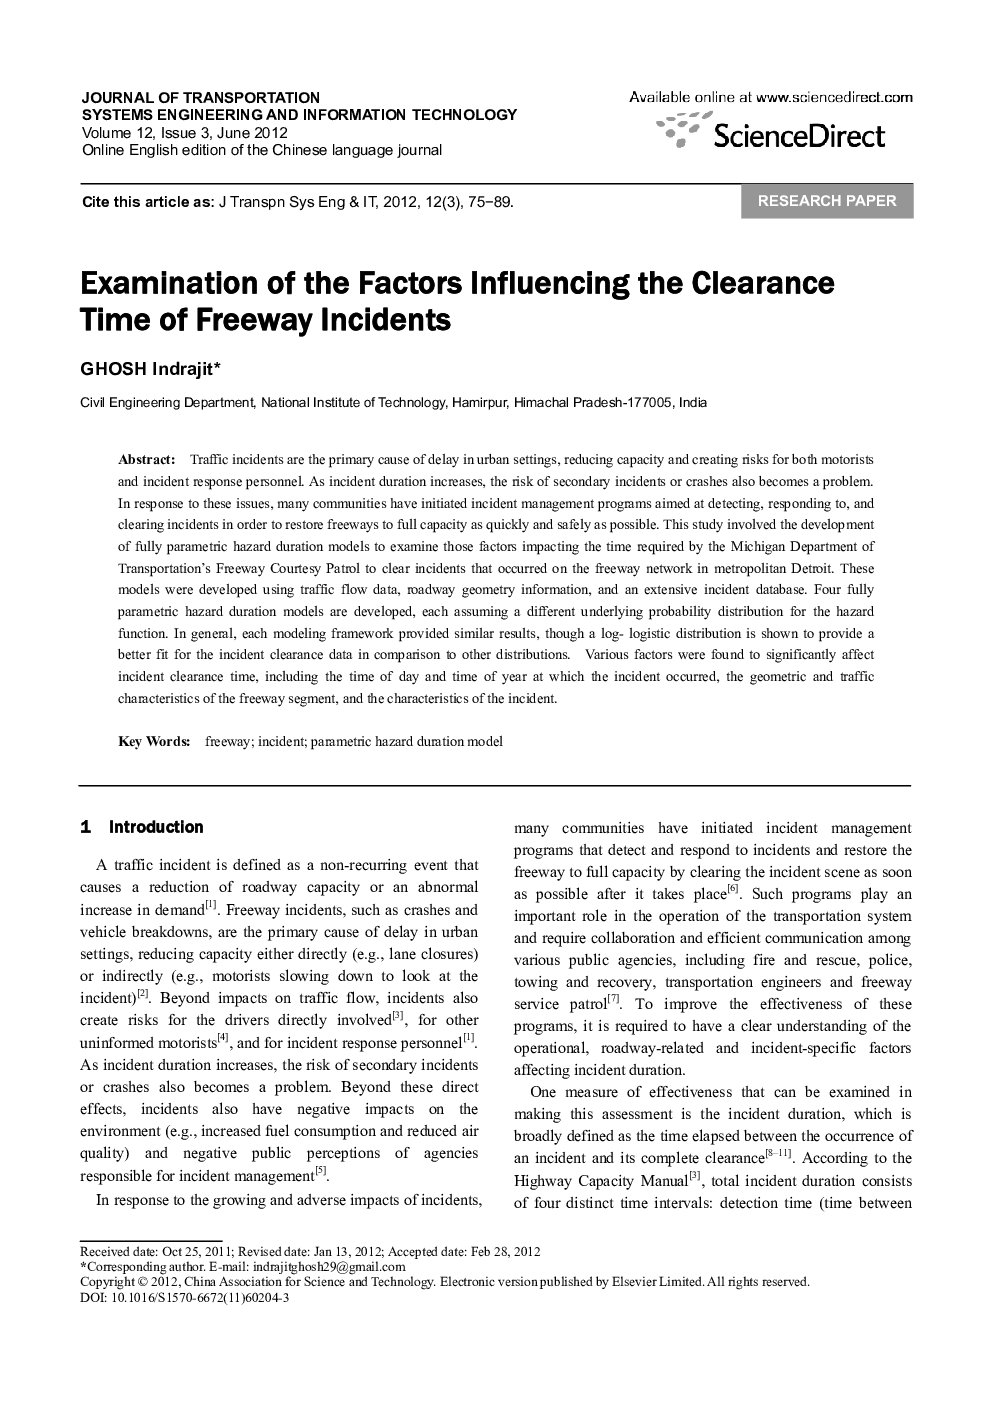 Examination of the Factors Influencing the Clearance Time of Freeway Incidents